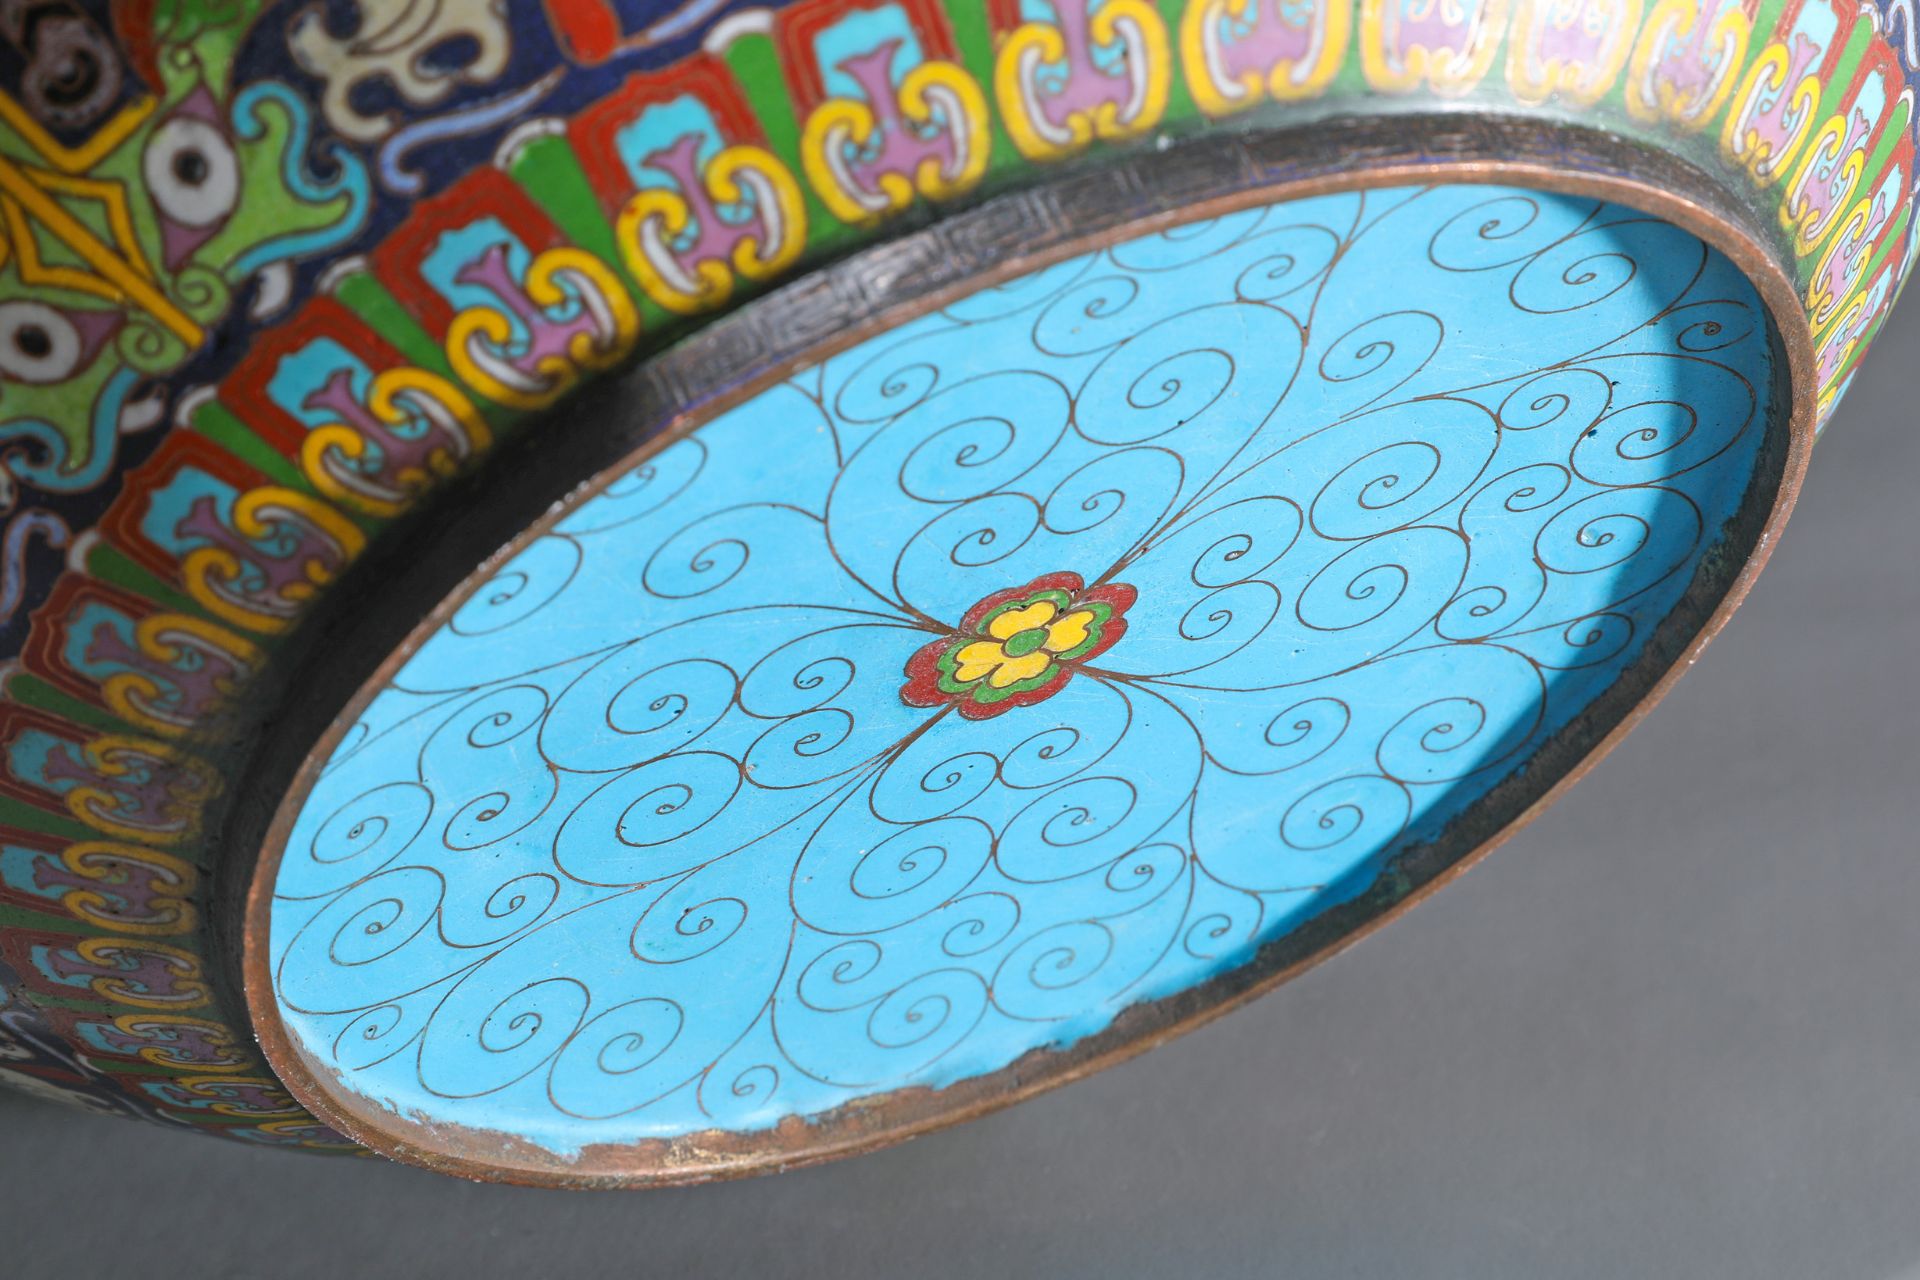 Large Cloisonné bowl with Taotie masks and tendrils - Image 7 of 7